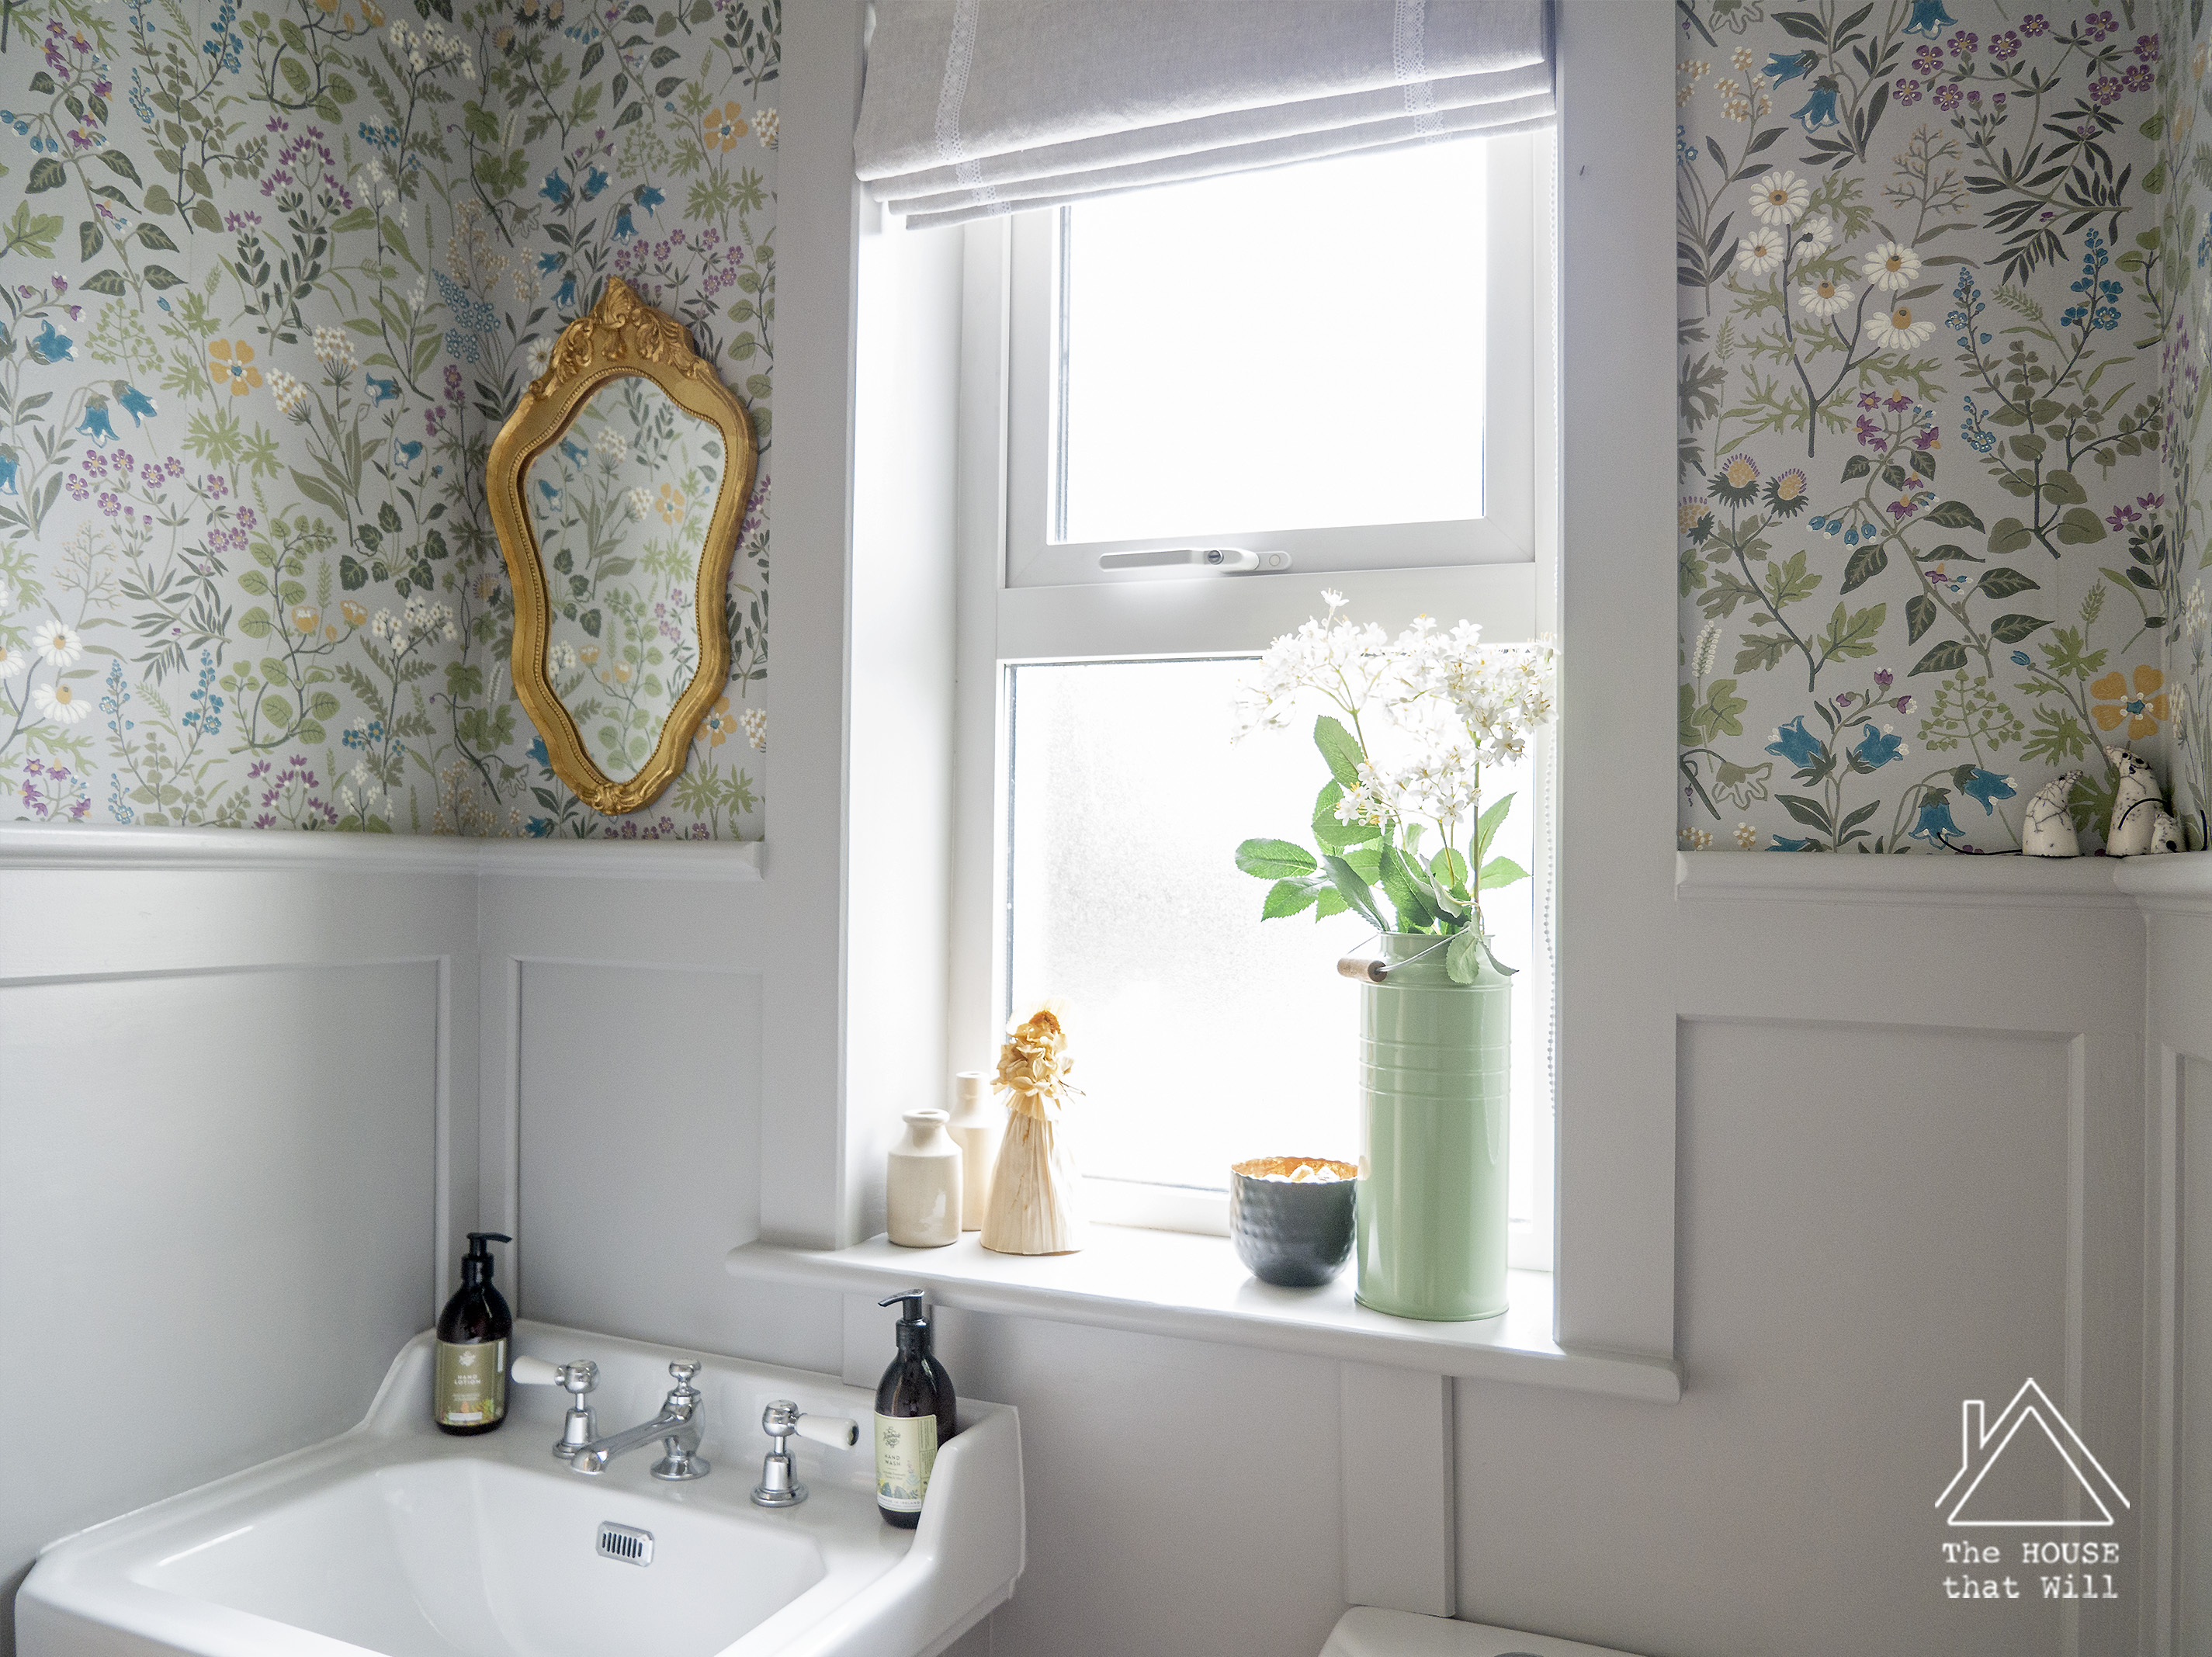 The House that Will | Downstairs Loo Powder Room Half Bath Room Reveal (One Room Challenge)